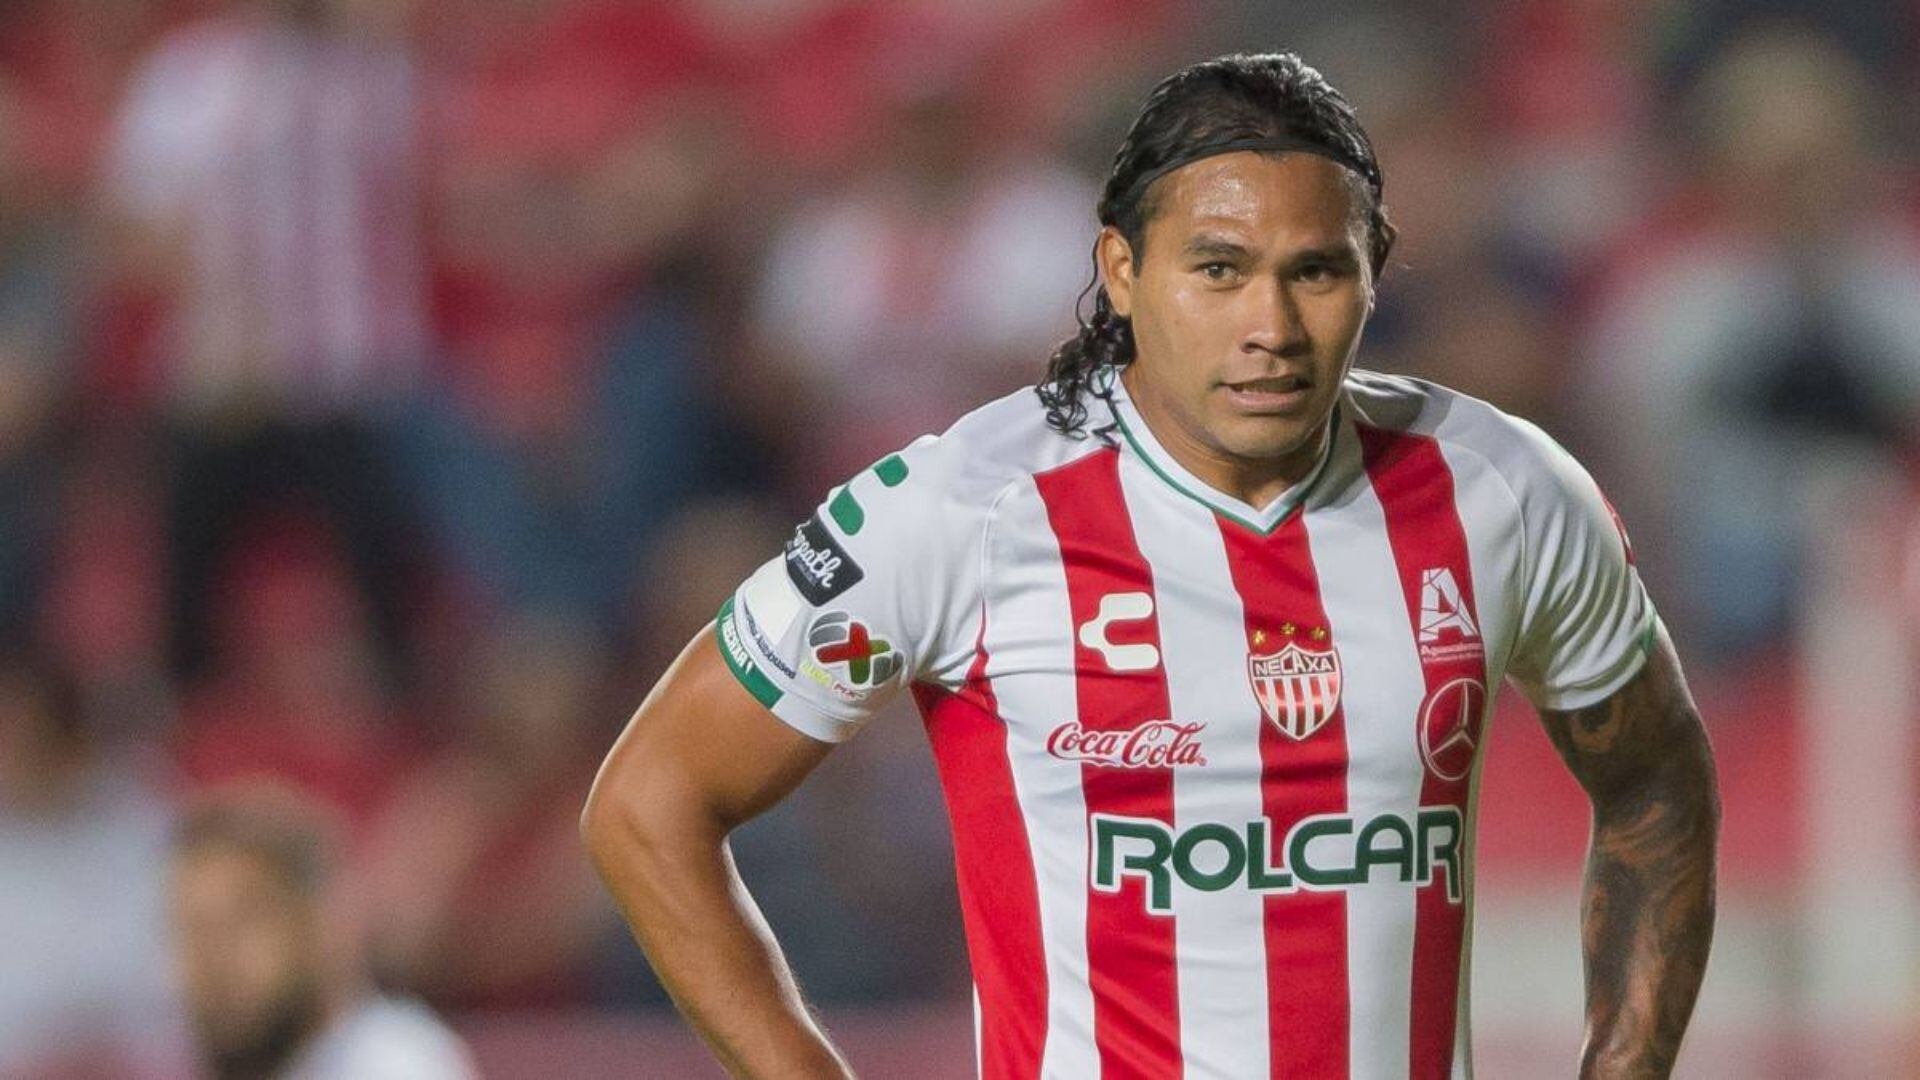 Carlos “Gullit” Peña won’t play in USL Championship and remains a free agent